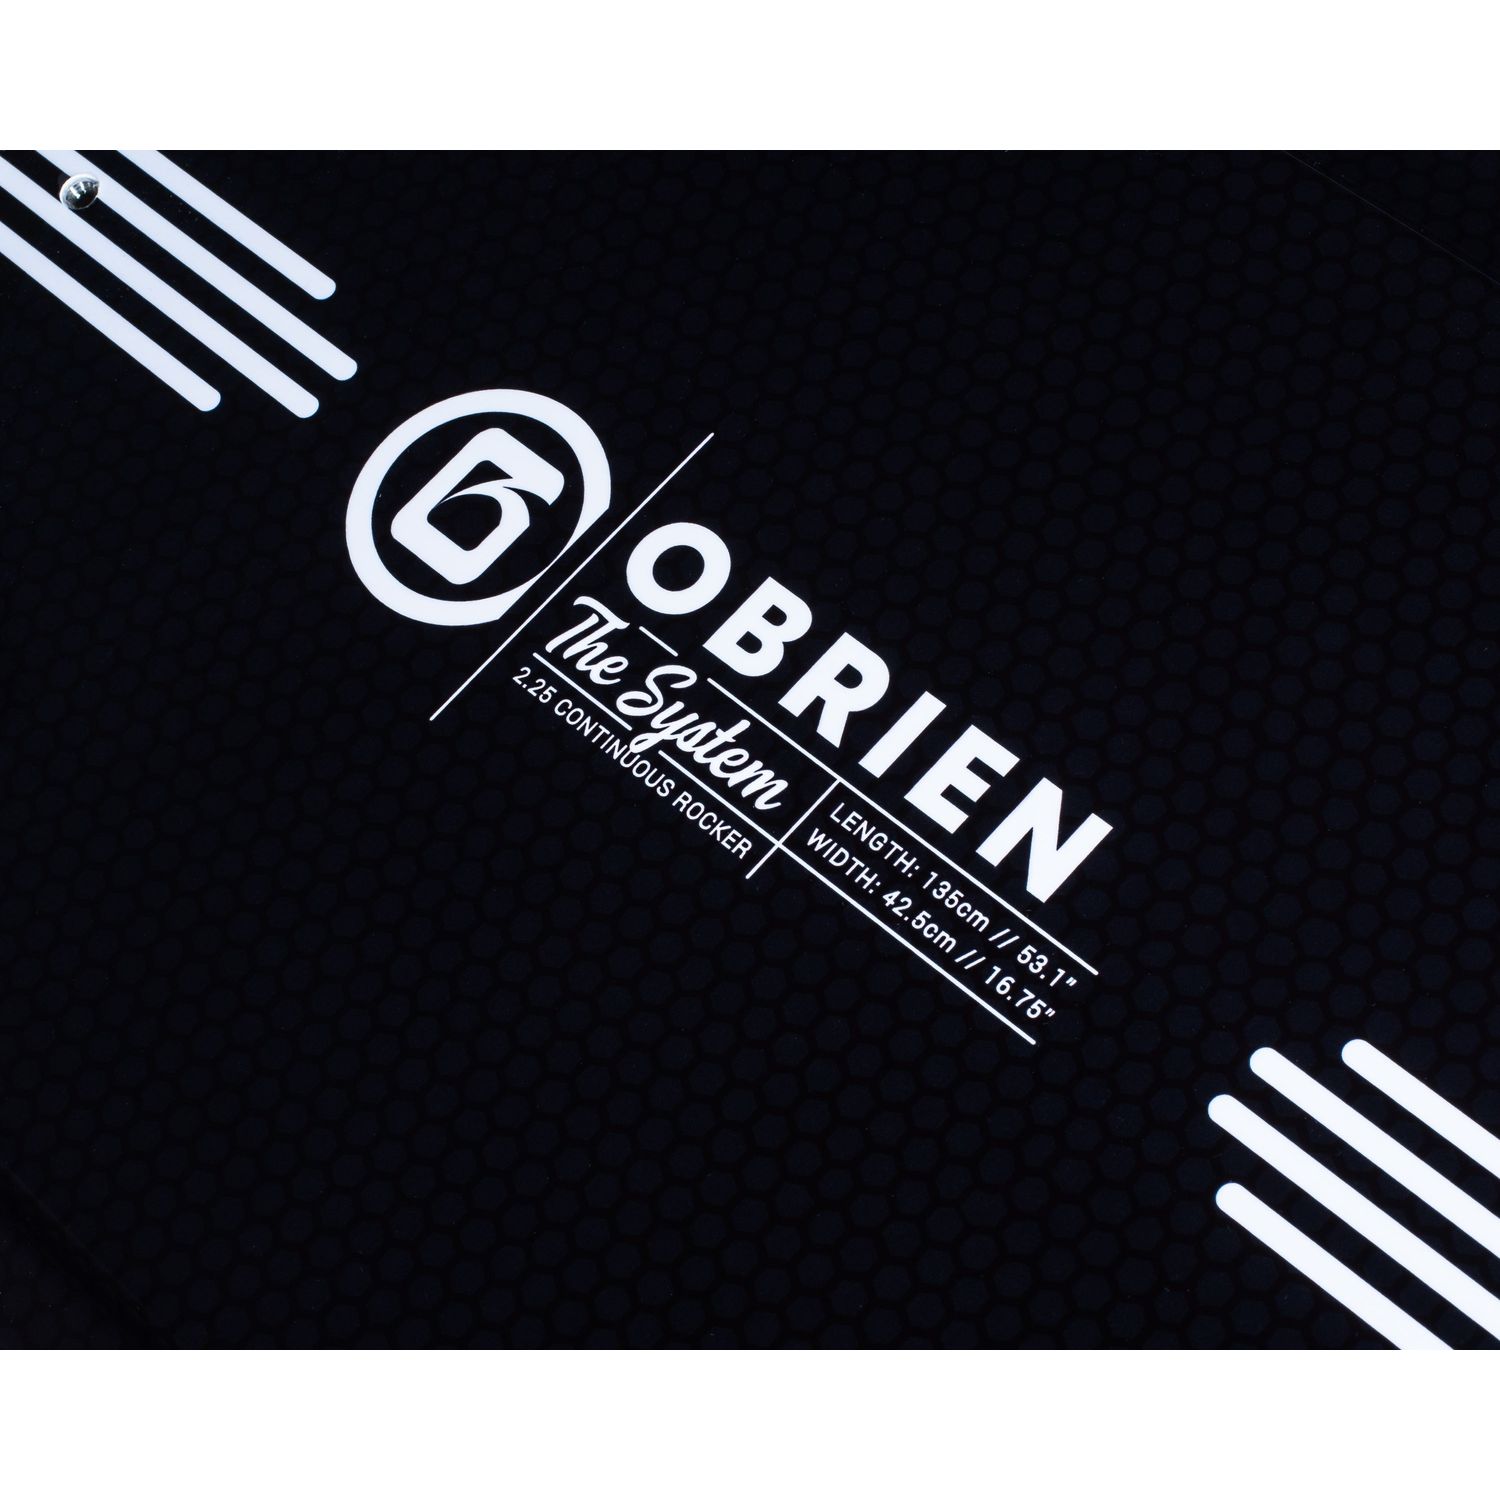 O'brien Wakeboard System 124